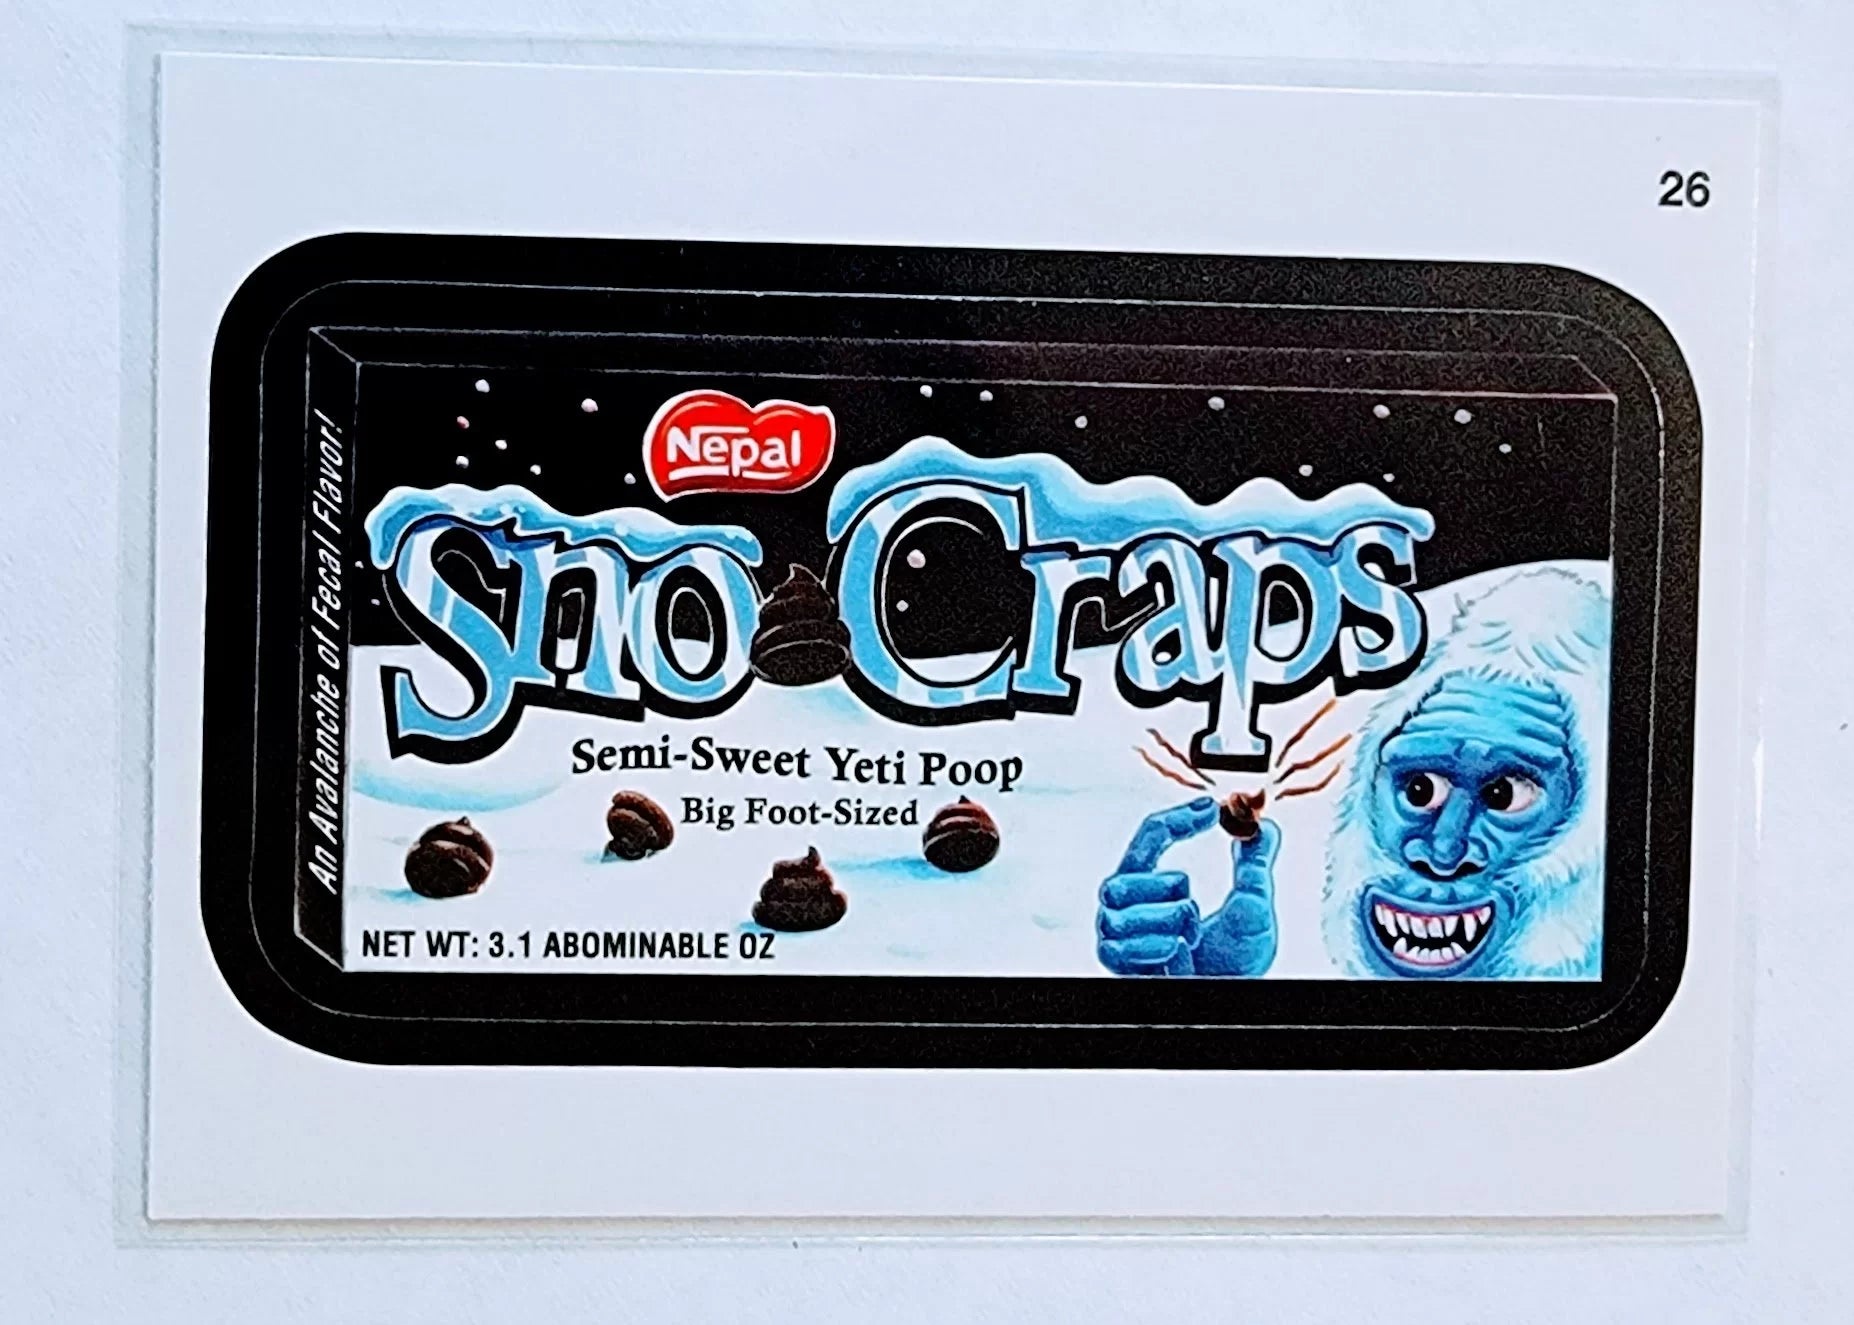 2013 Topps Wacky Packages Series 11 Sno Craps Sticker Trading Card MCSC1 simple Xclusive Collectibles   